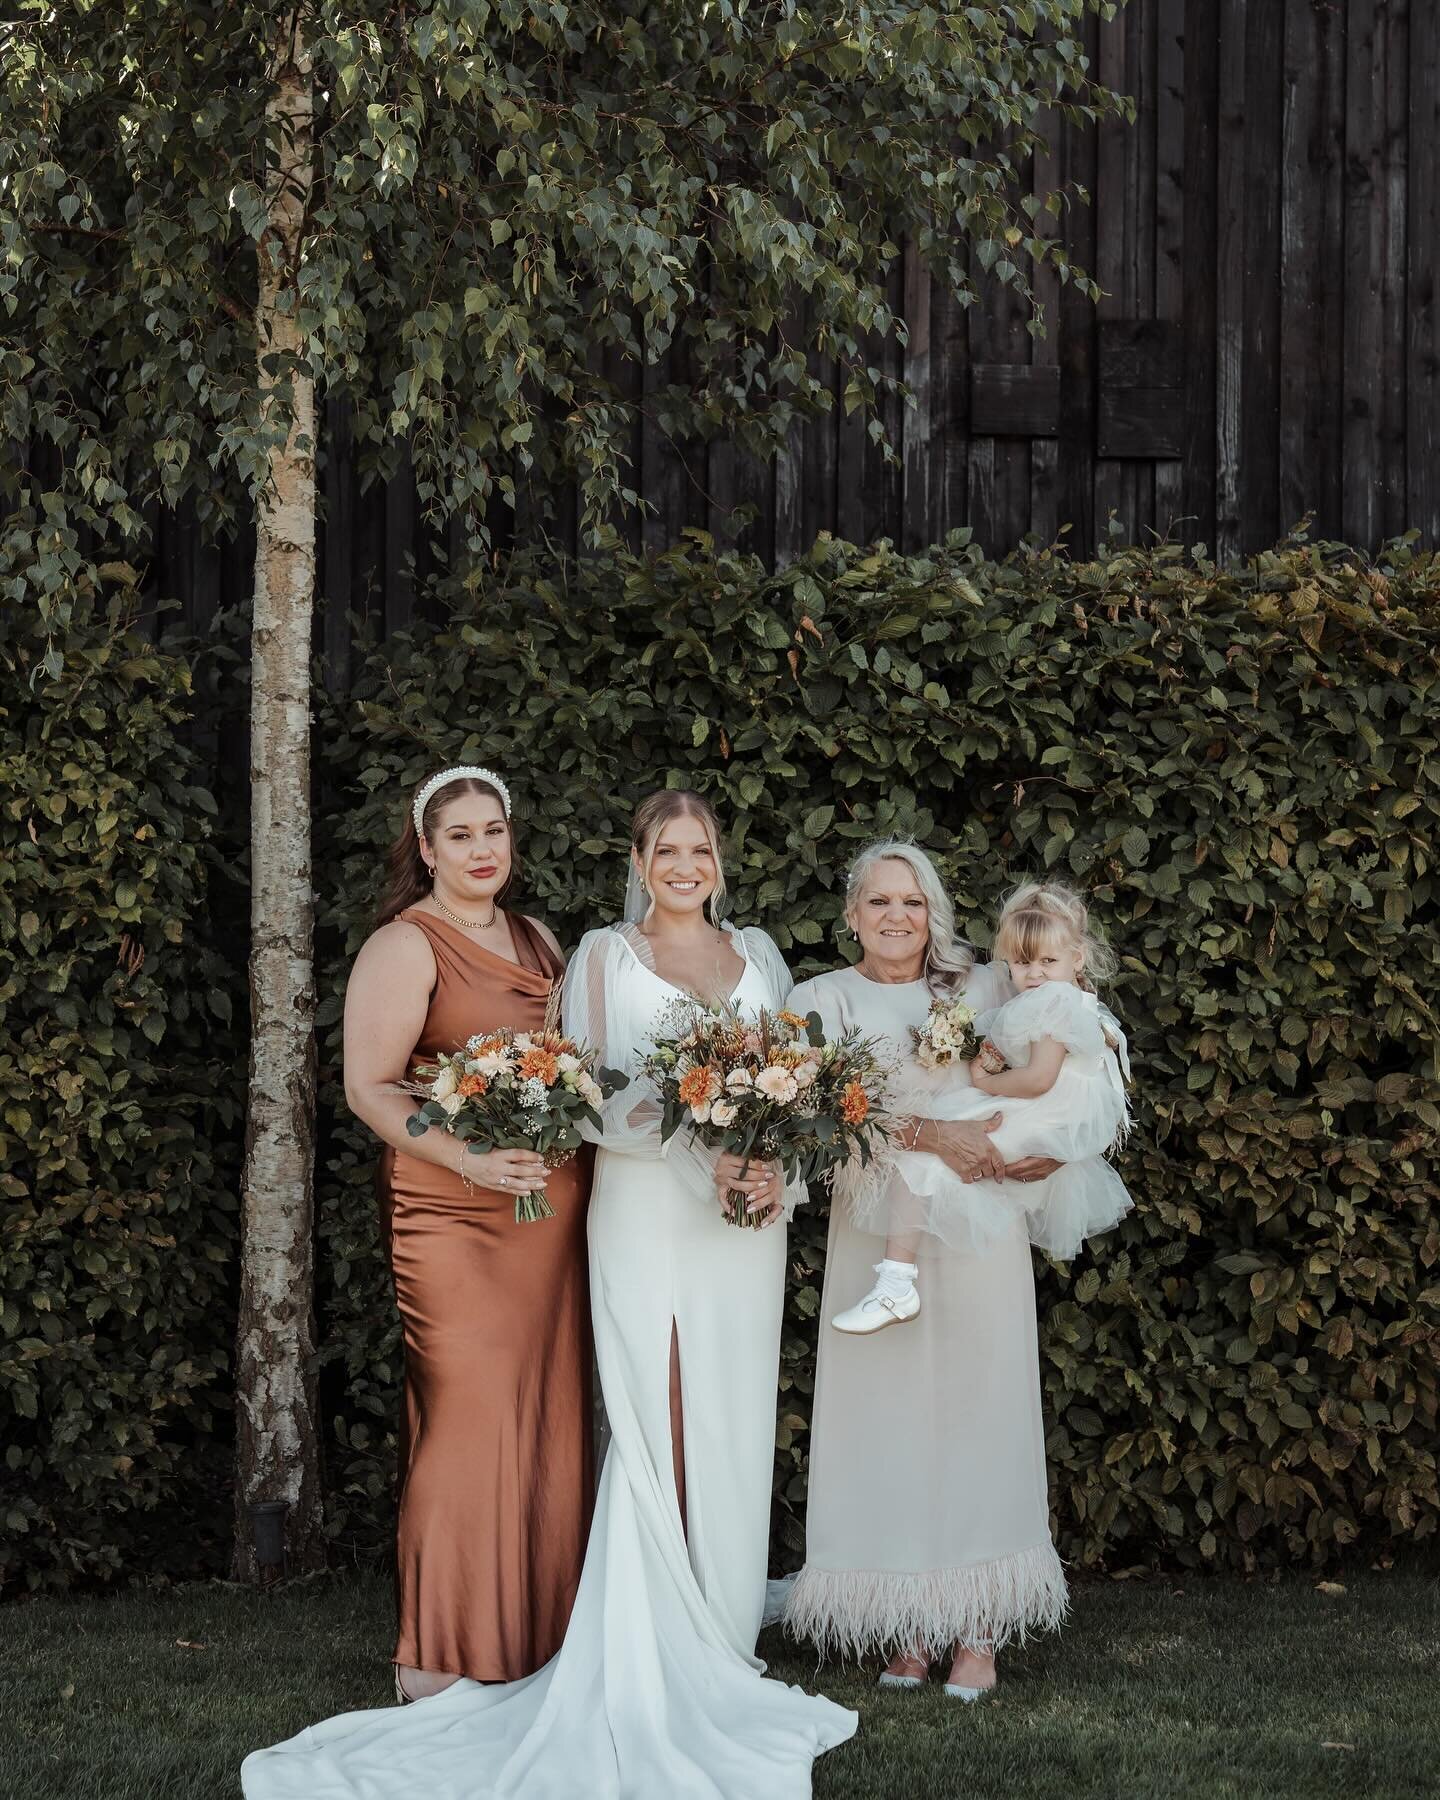 Happy international women&rsquo;s day 💪🏼 
From me and some of my favourite ladies big and small.
Dress @alenaleenabridal @bridalwarwickshire.
Hair @alicederbyshire 
Makeup @bryonydaltonmakeupartist 
Bridesmaid dresses @sixstories.
Venue @primrosehi